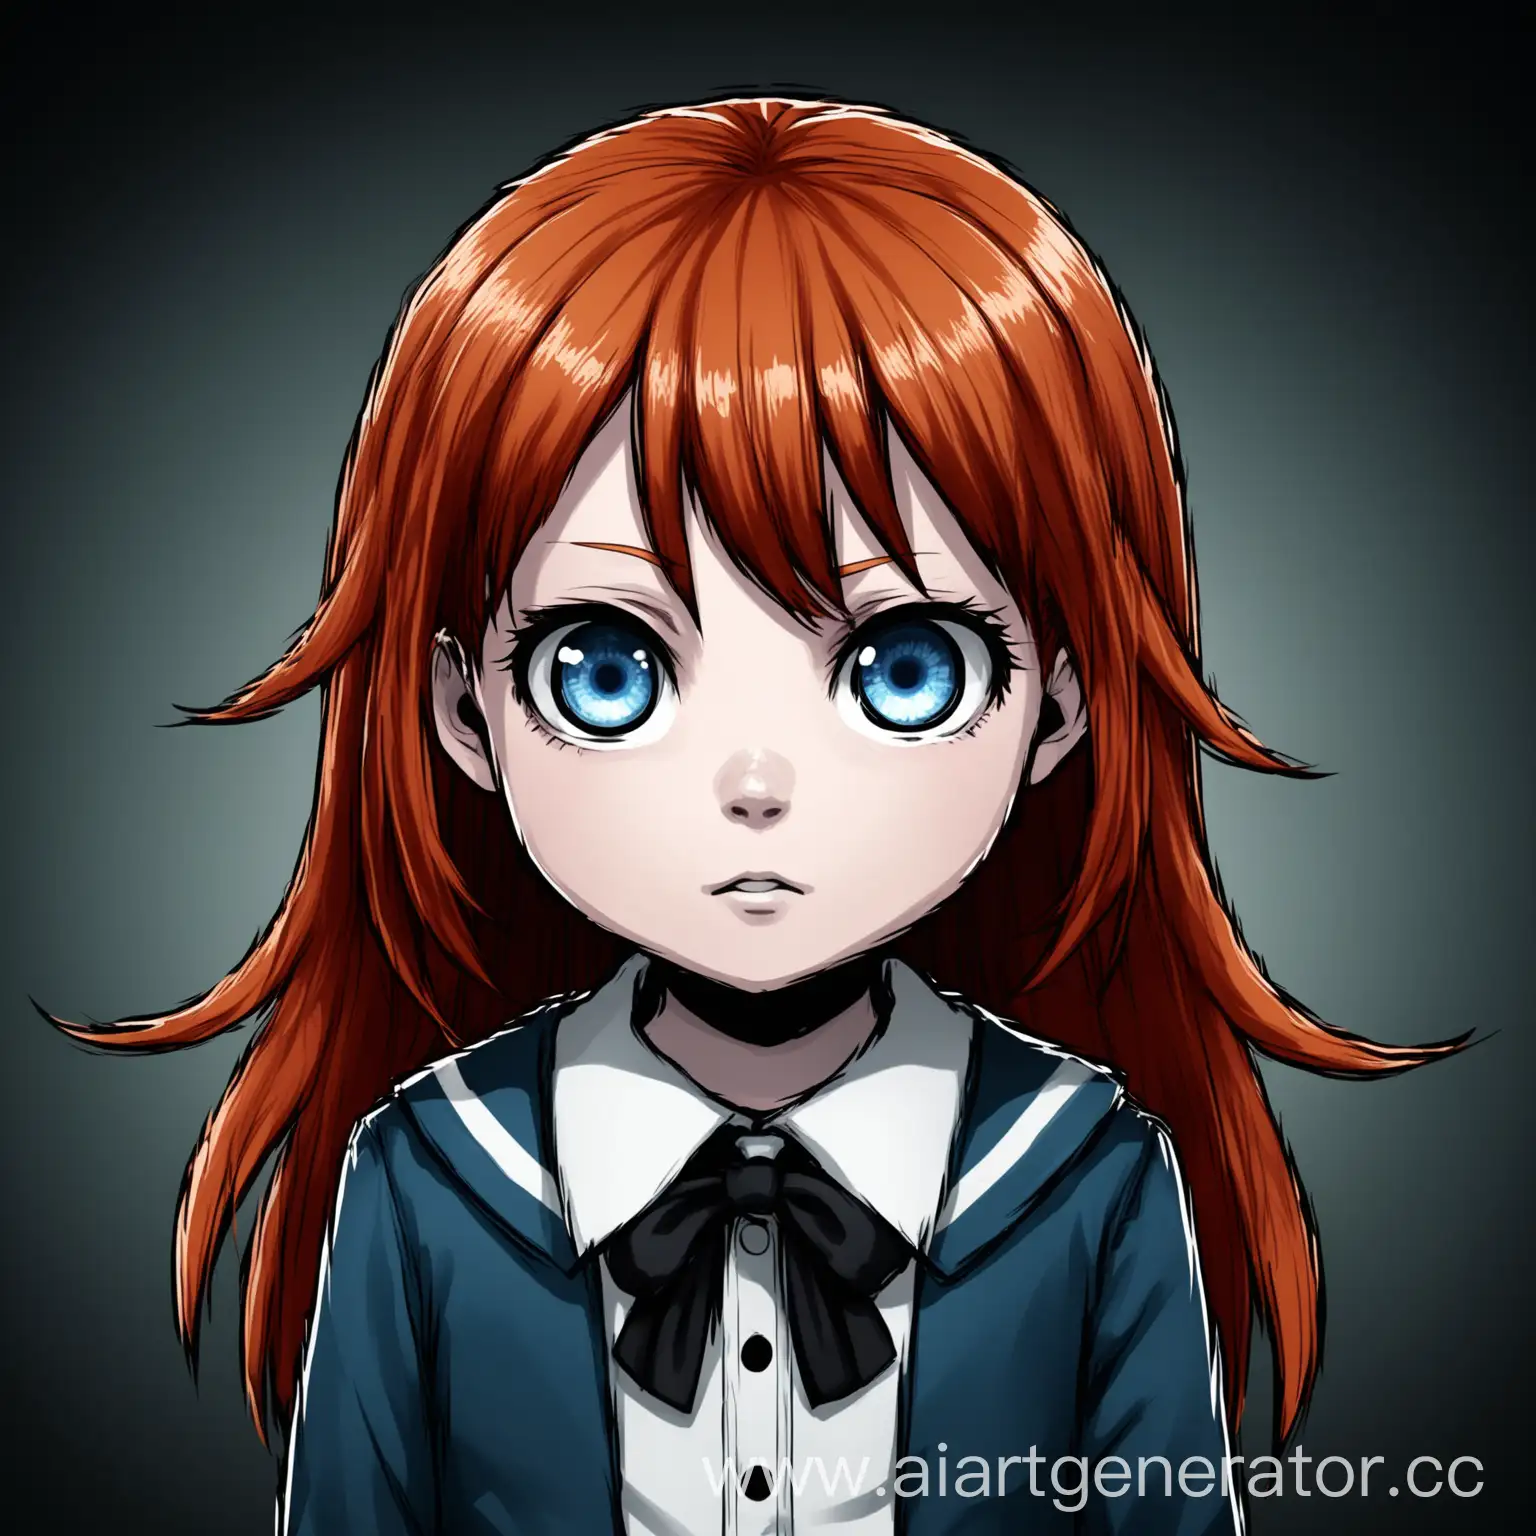 Young-Girl-with-Ginger-Hair-and-Blue-Eyes-in-Danganronpa-Style